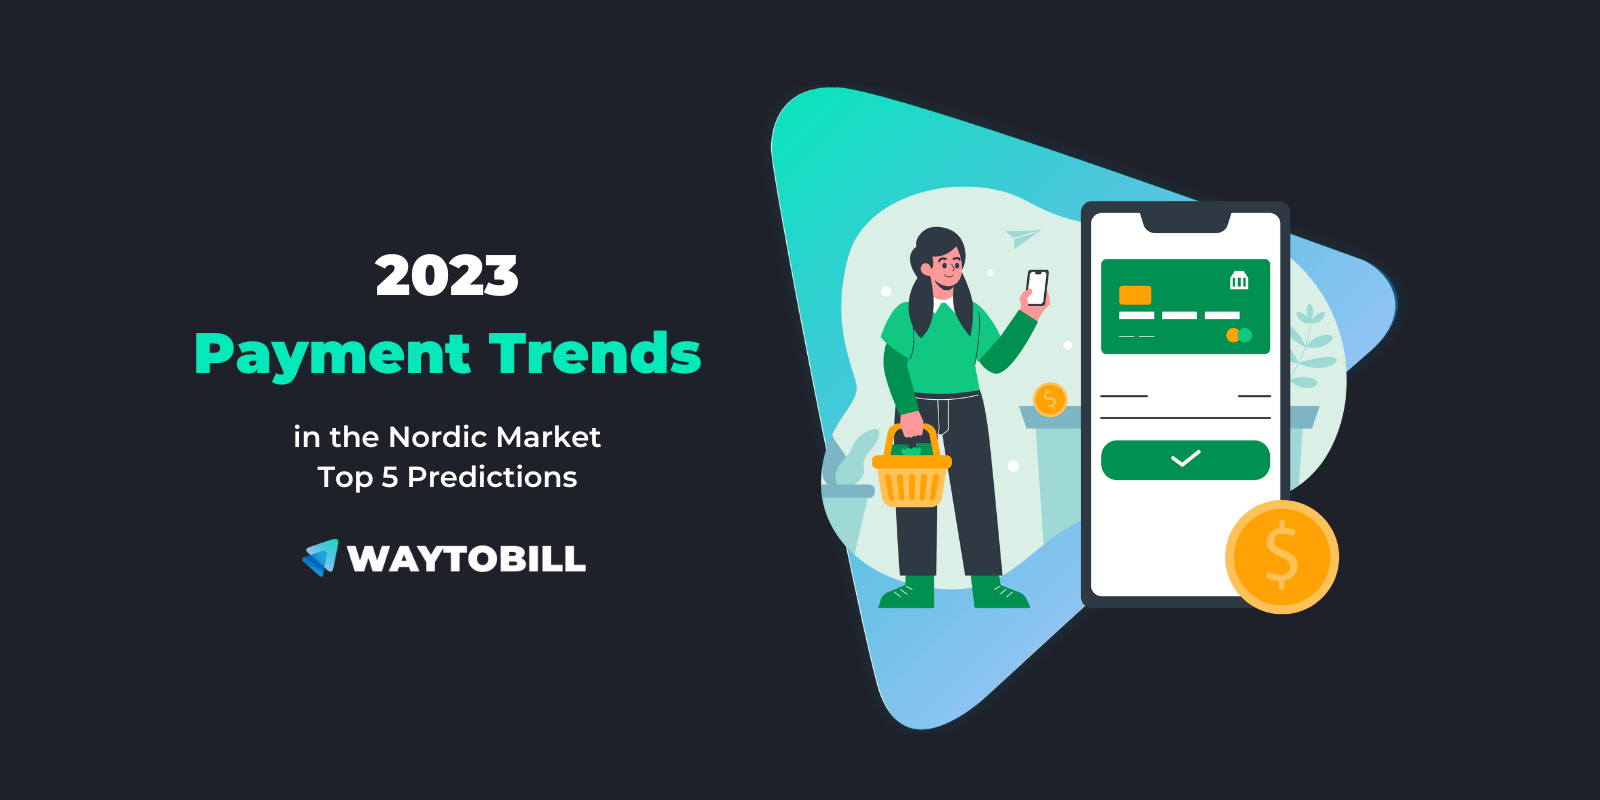 Top 5 2023 Payment Trends in the Nordic Market